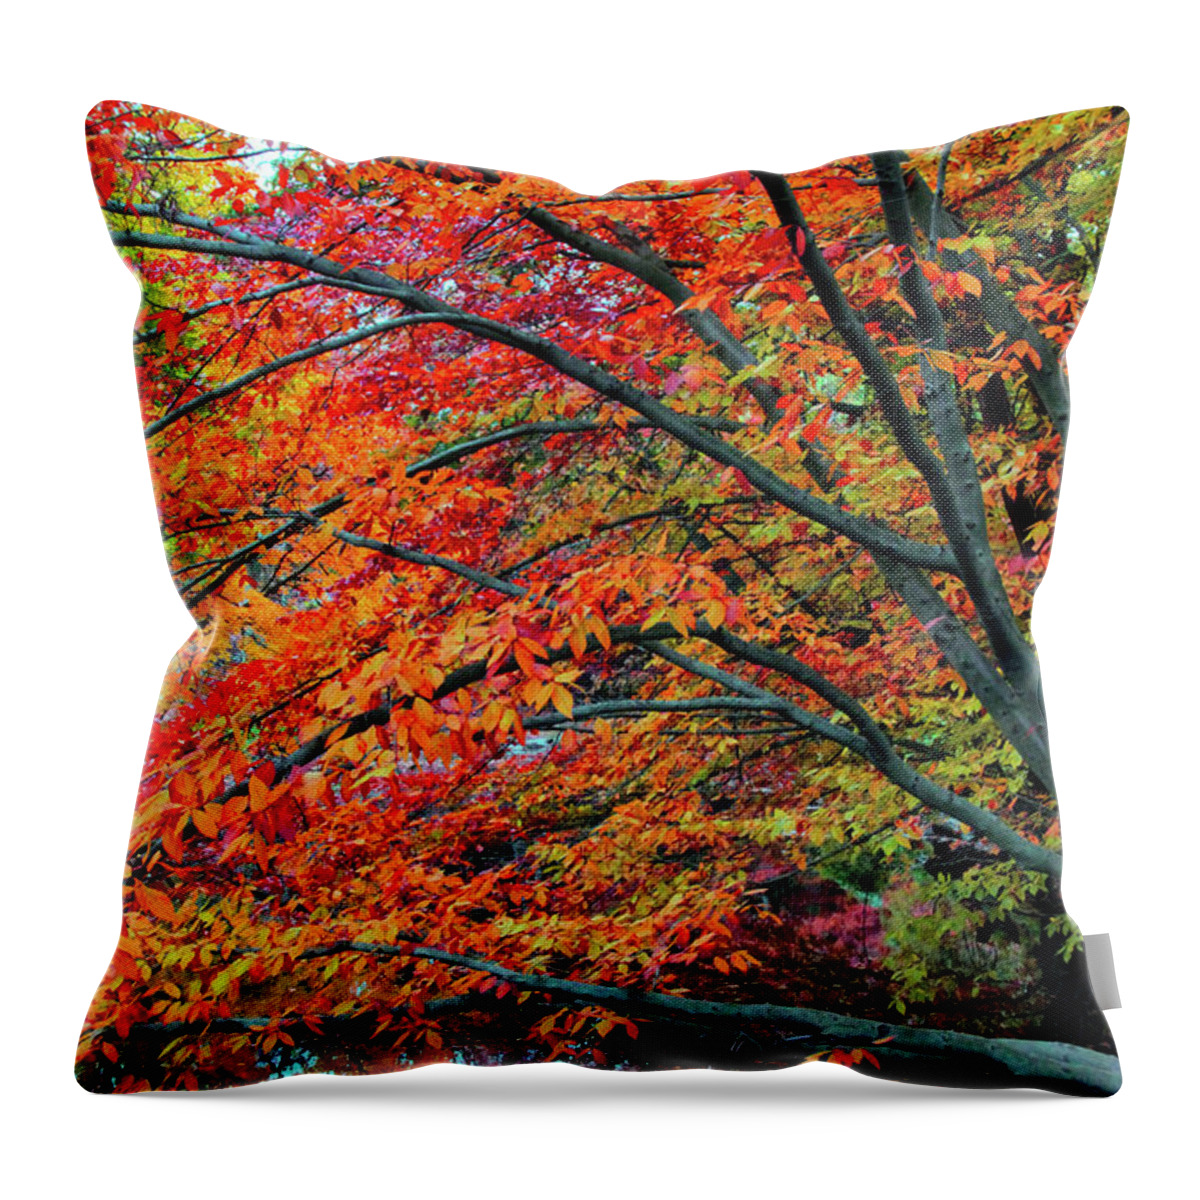 Autumn Throw Pillow featuring the photograph Flickering Foliage by Jessica Jenney